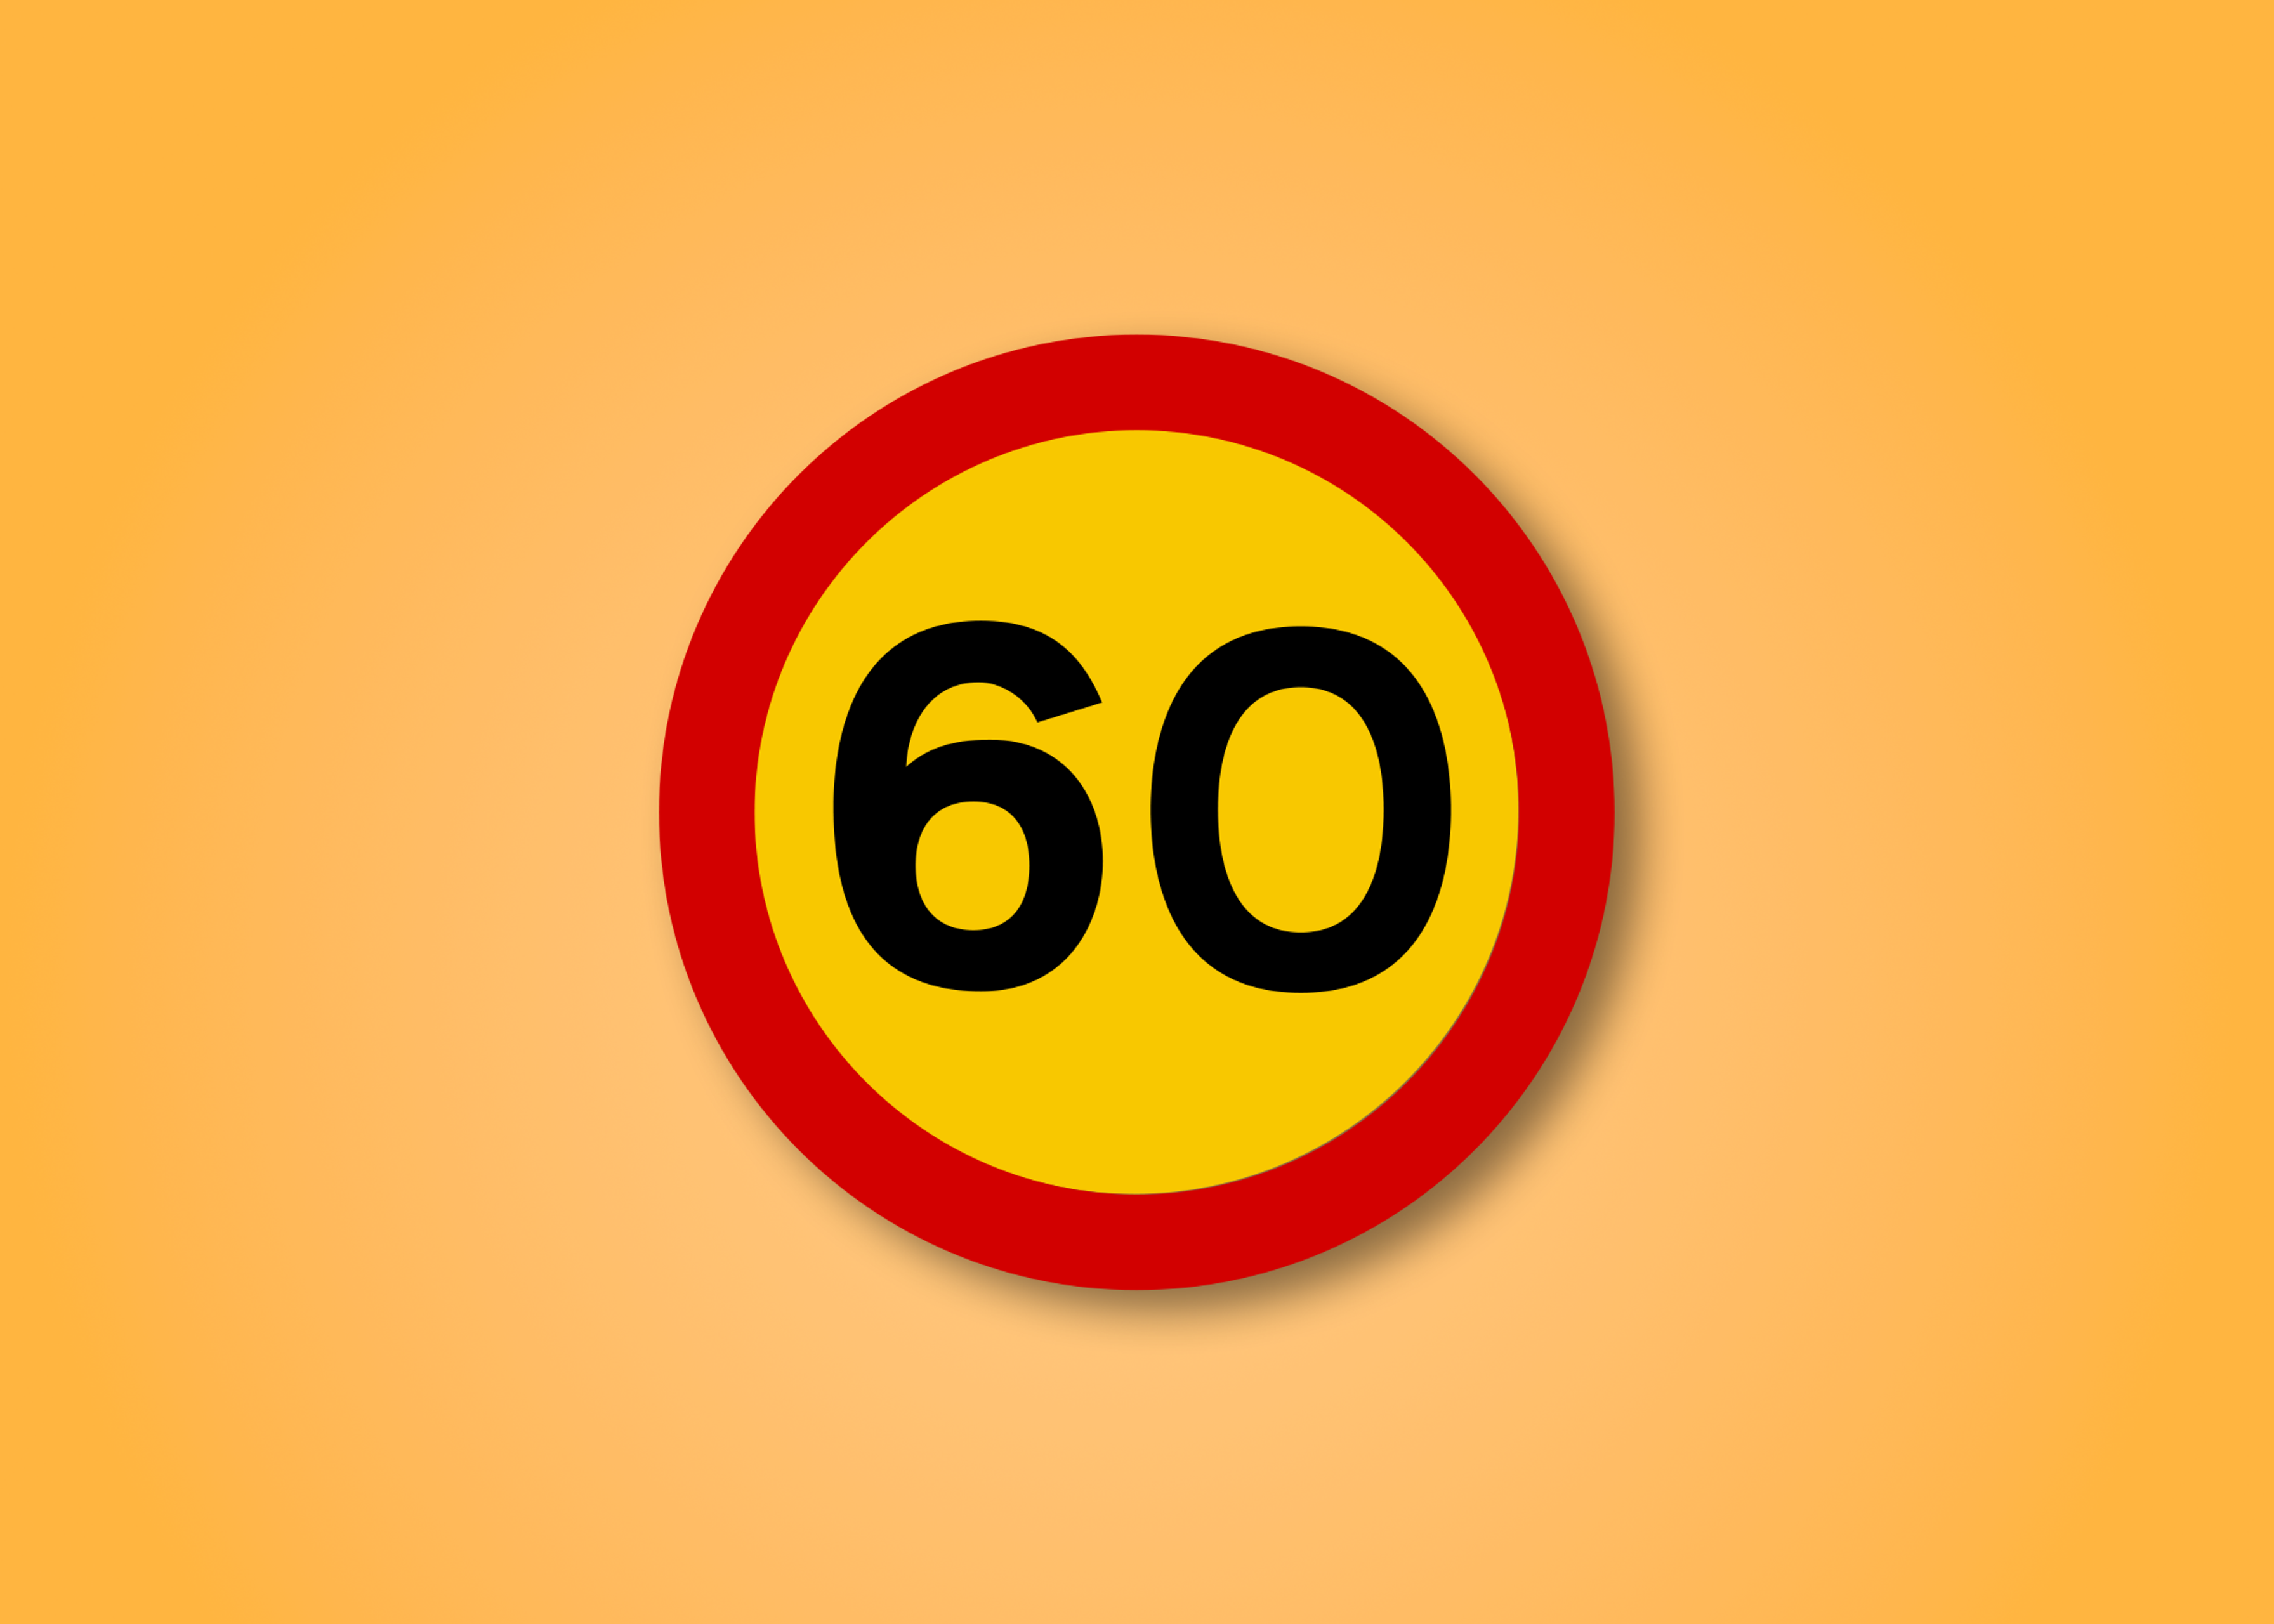 Red and yellow circle road sign with the number 60 in the middle. This road sign means the Speed limit is 60.